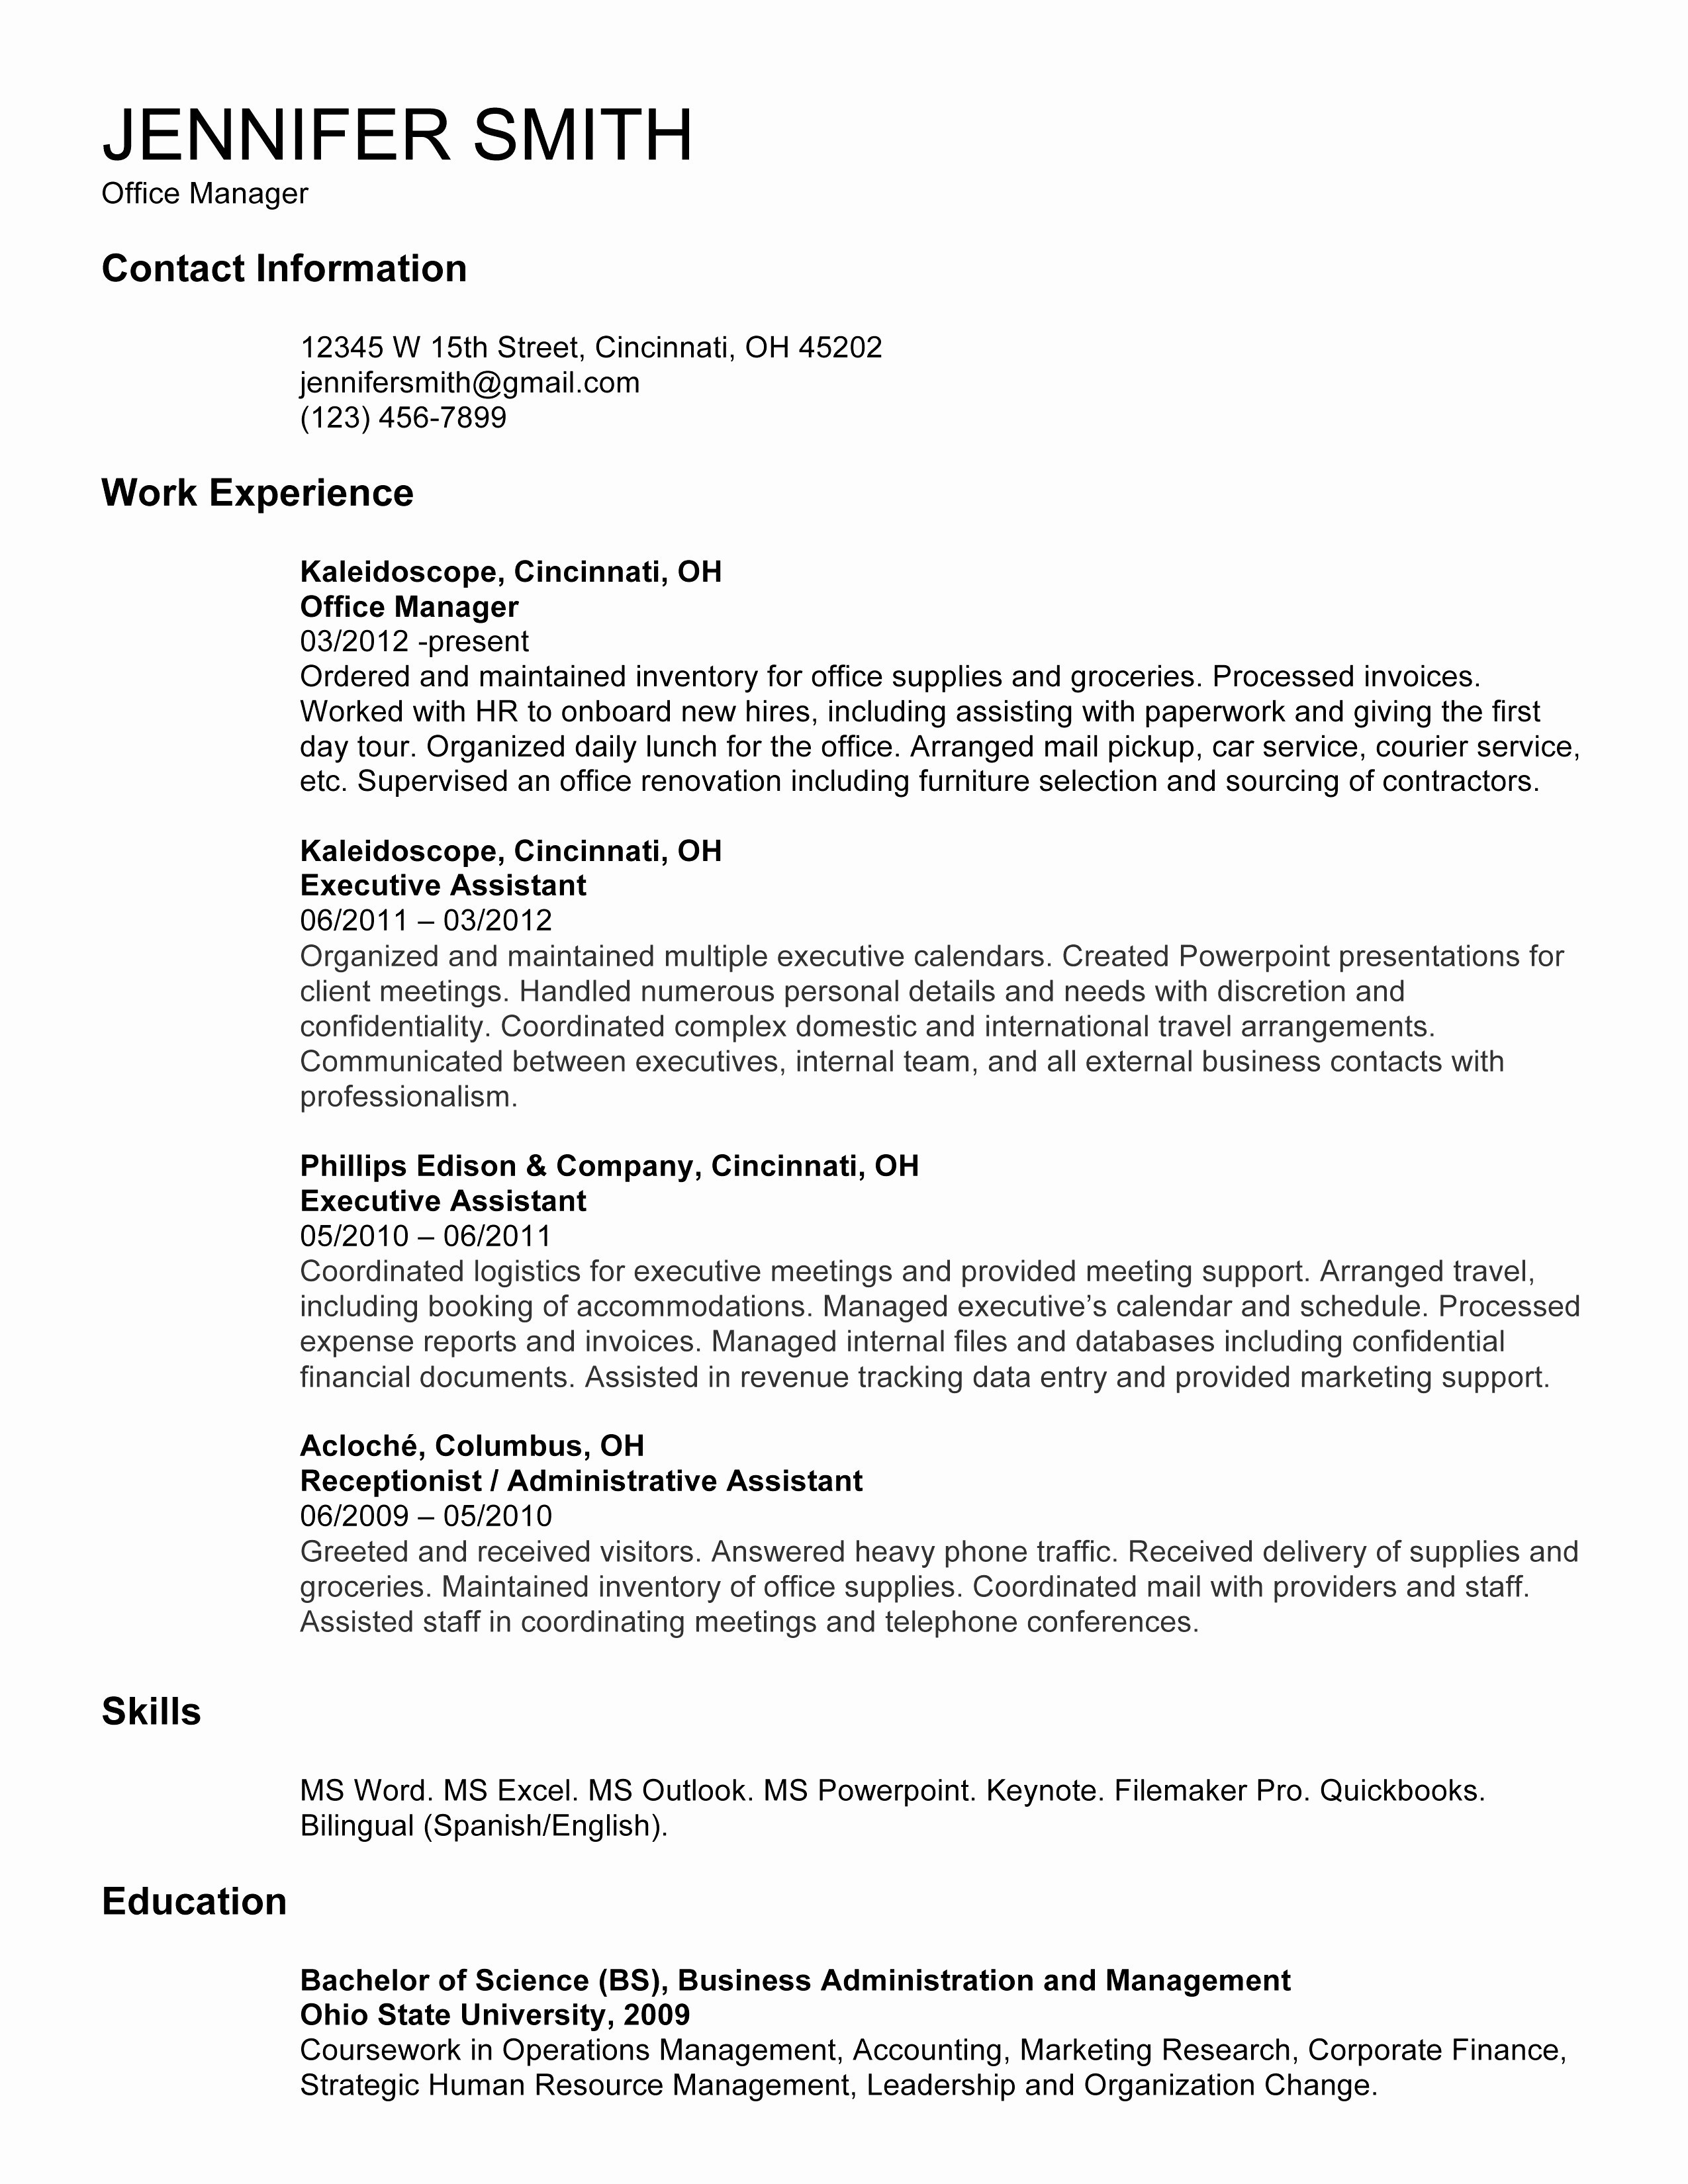 service animal letter template example-American Resume Sample New Student Resume 0d Wallpapers 42 Awesome Lovely Resume Template for social Worker from emotional support animal letter 3-i